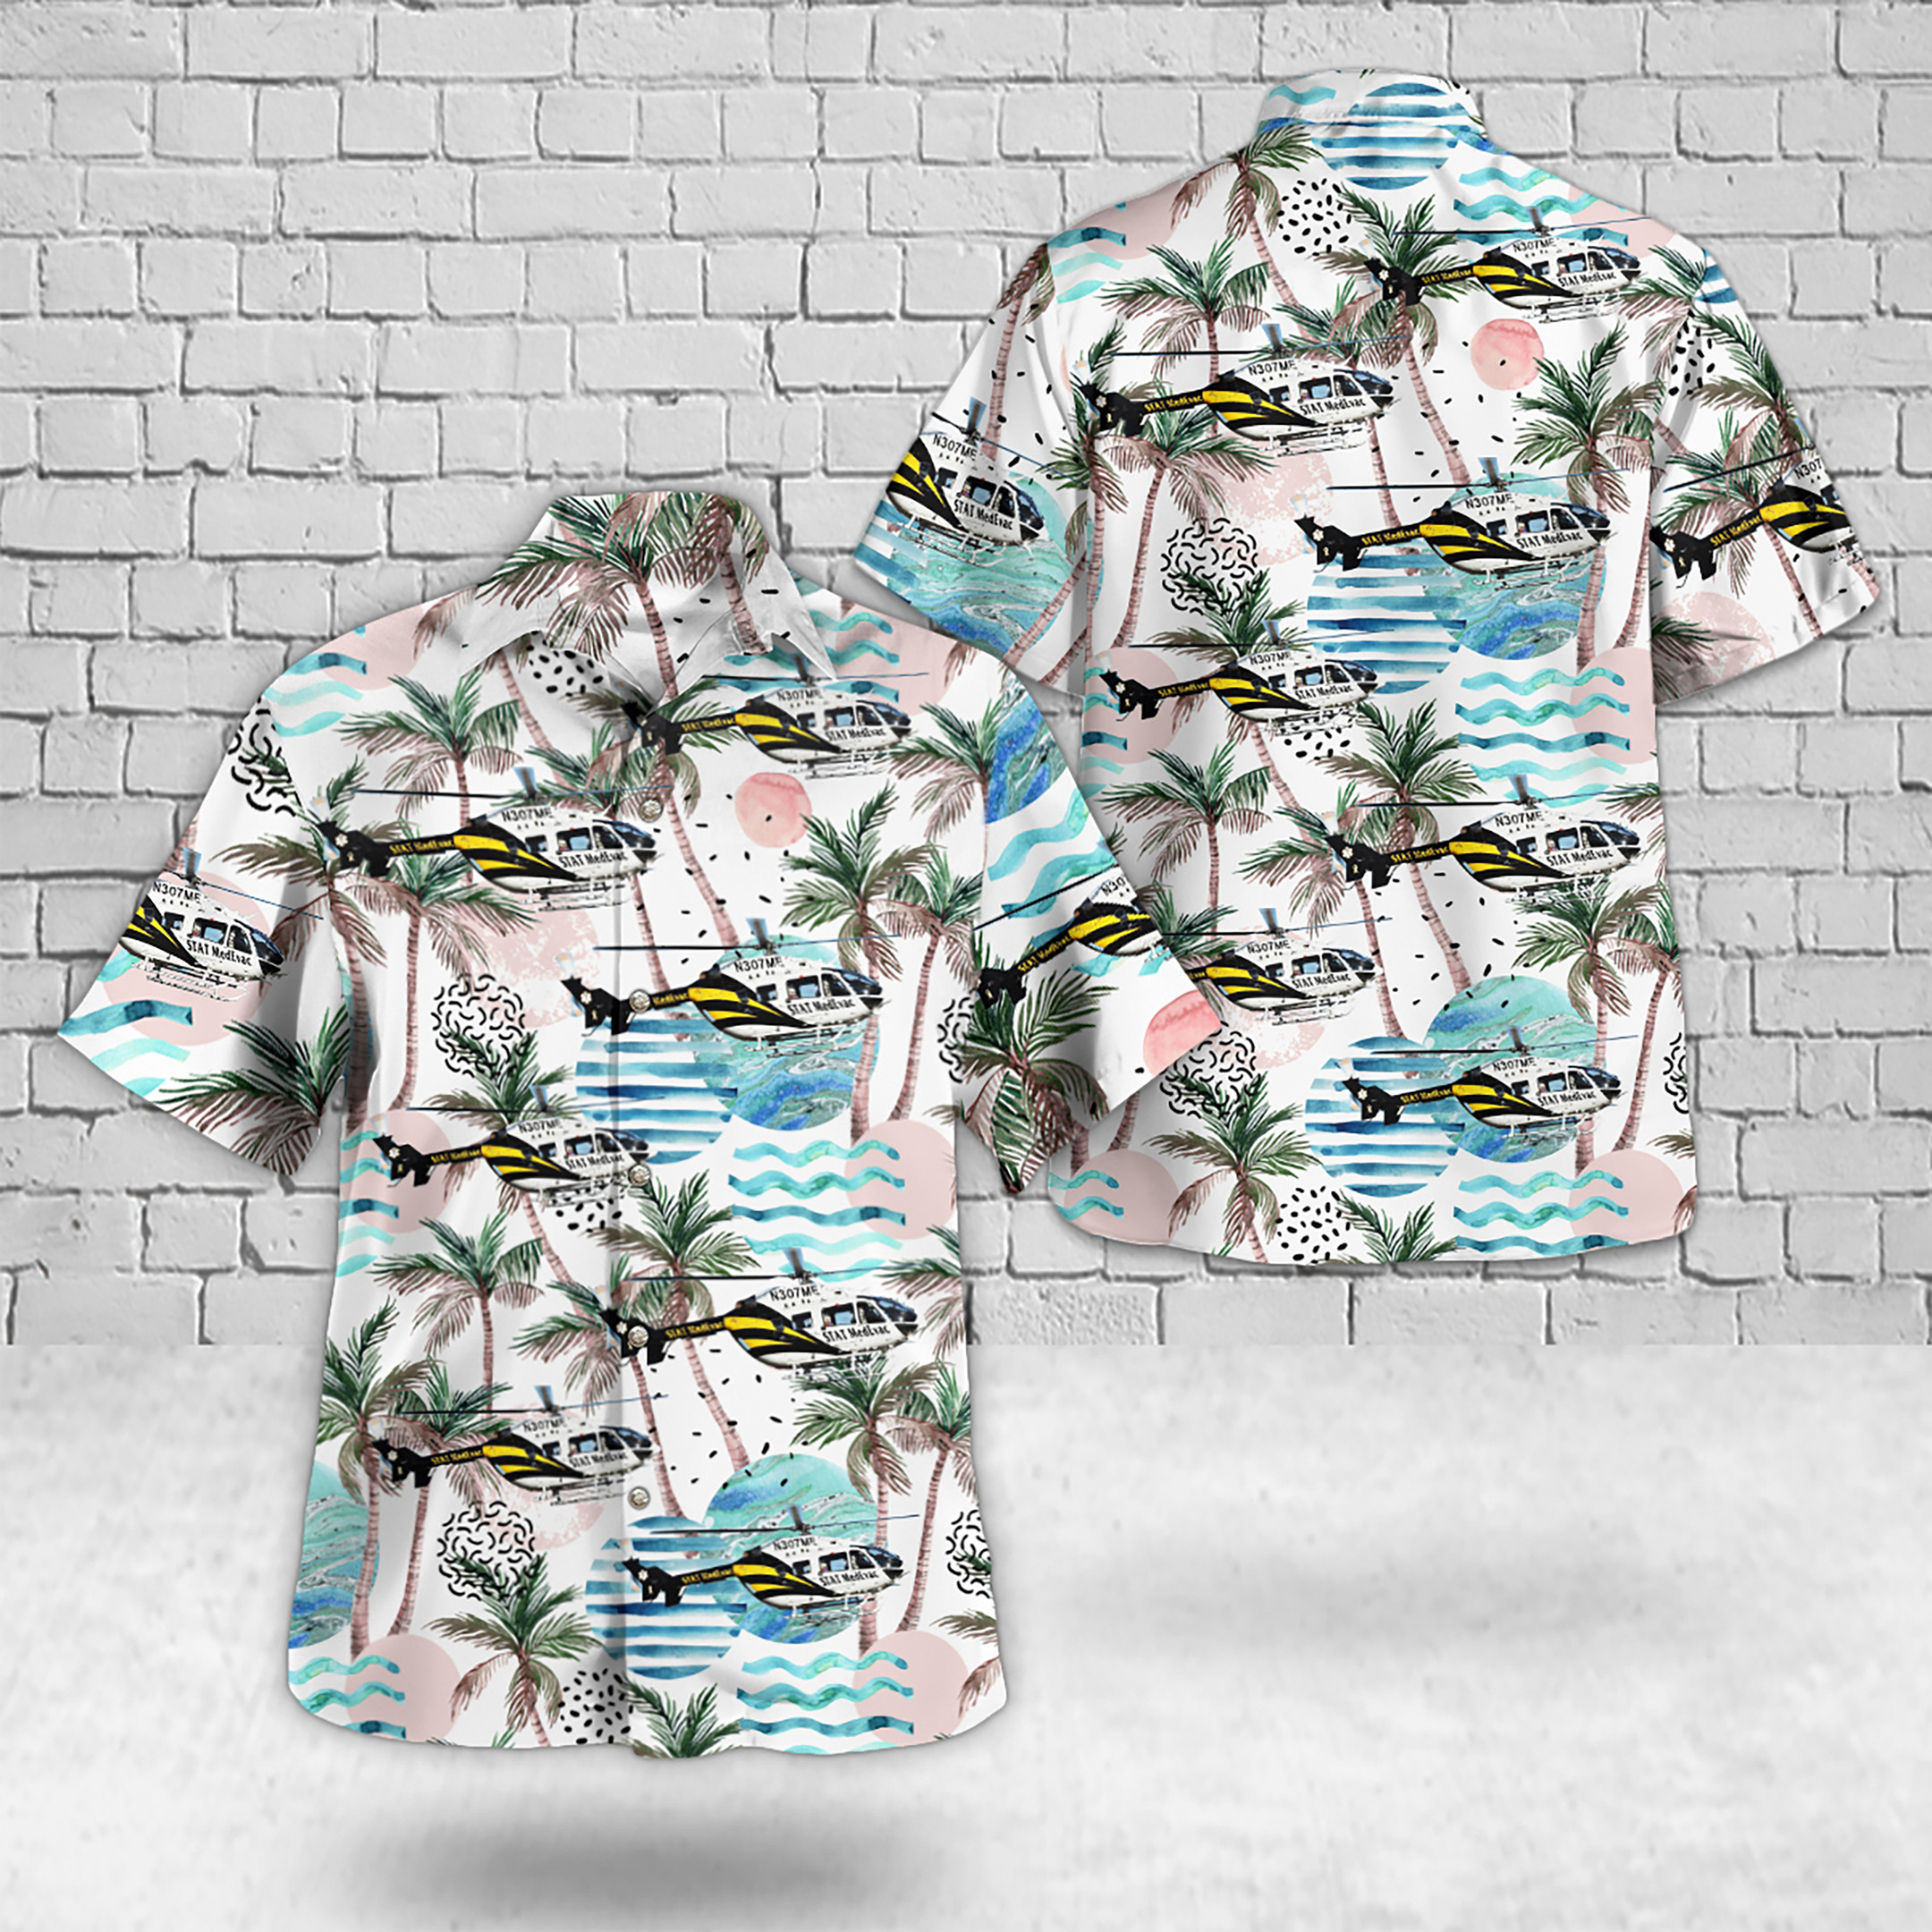 If you are in need of a new summertime look, pick up this Hawaiian shirt 60